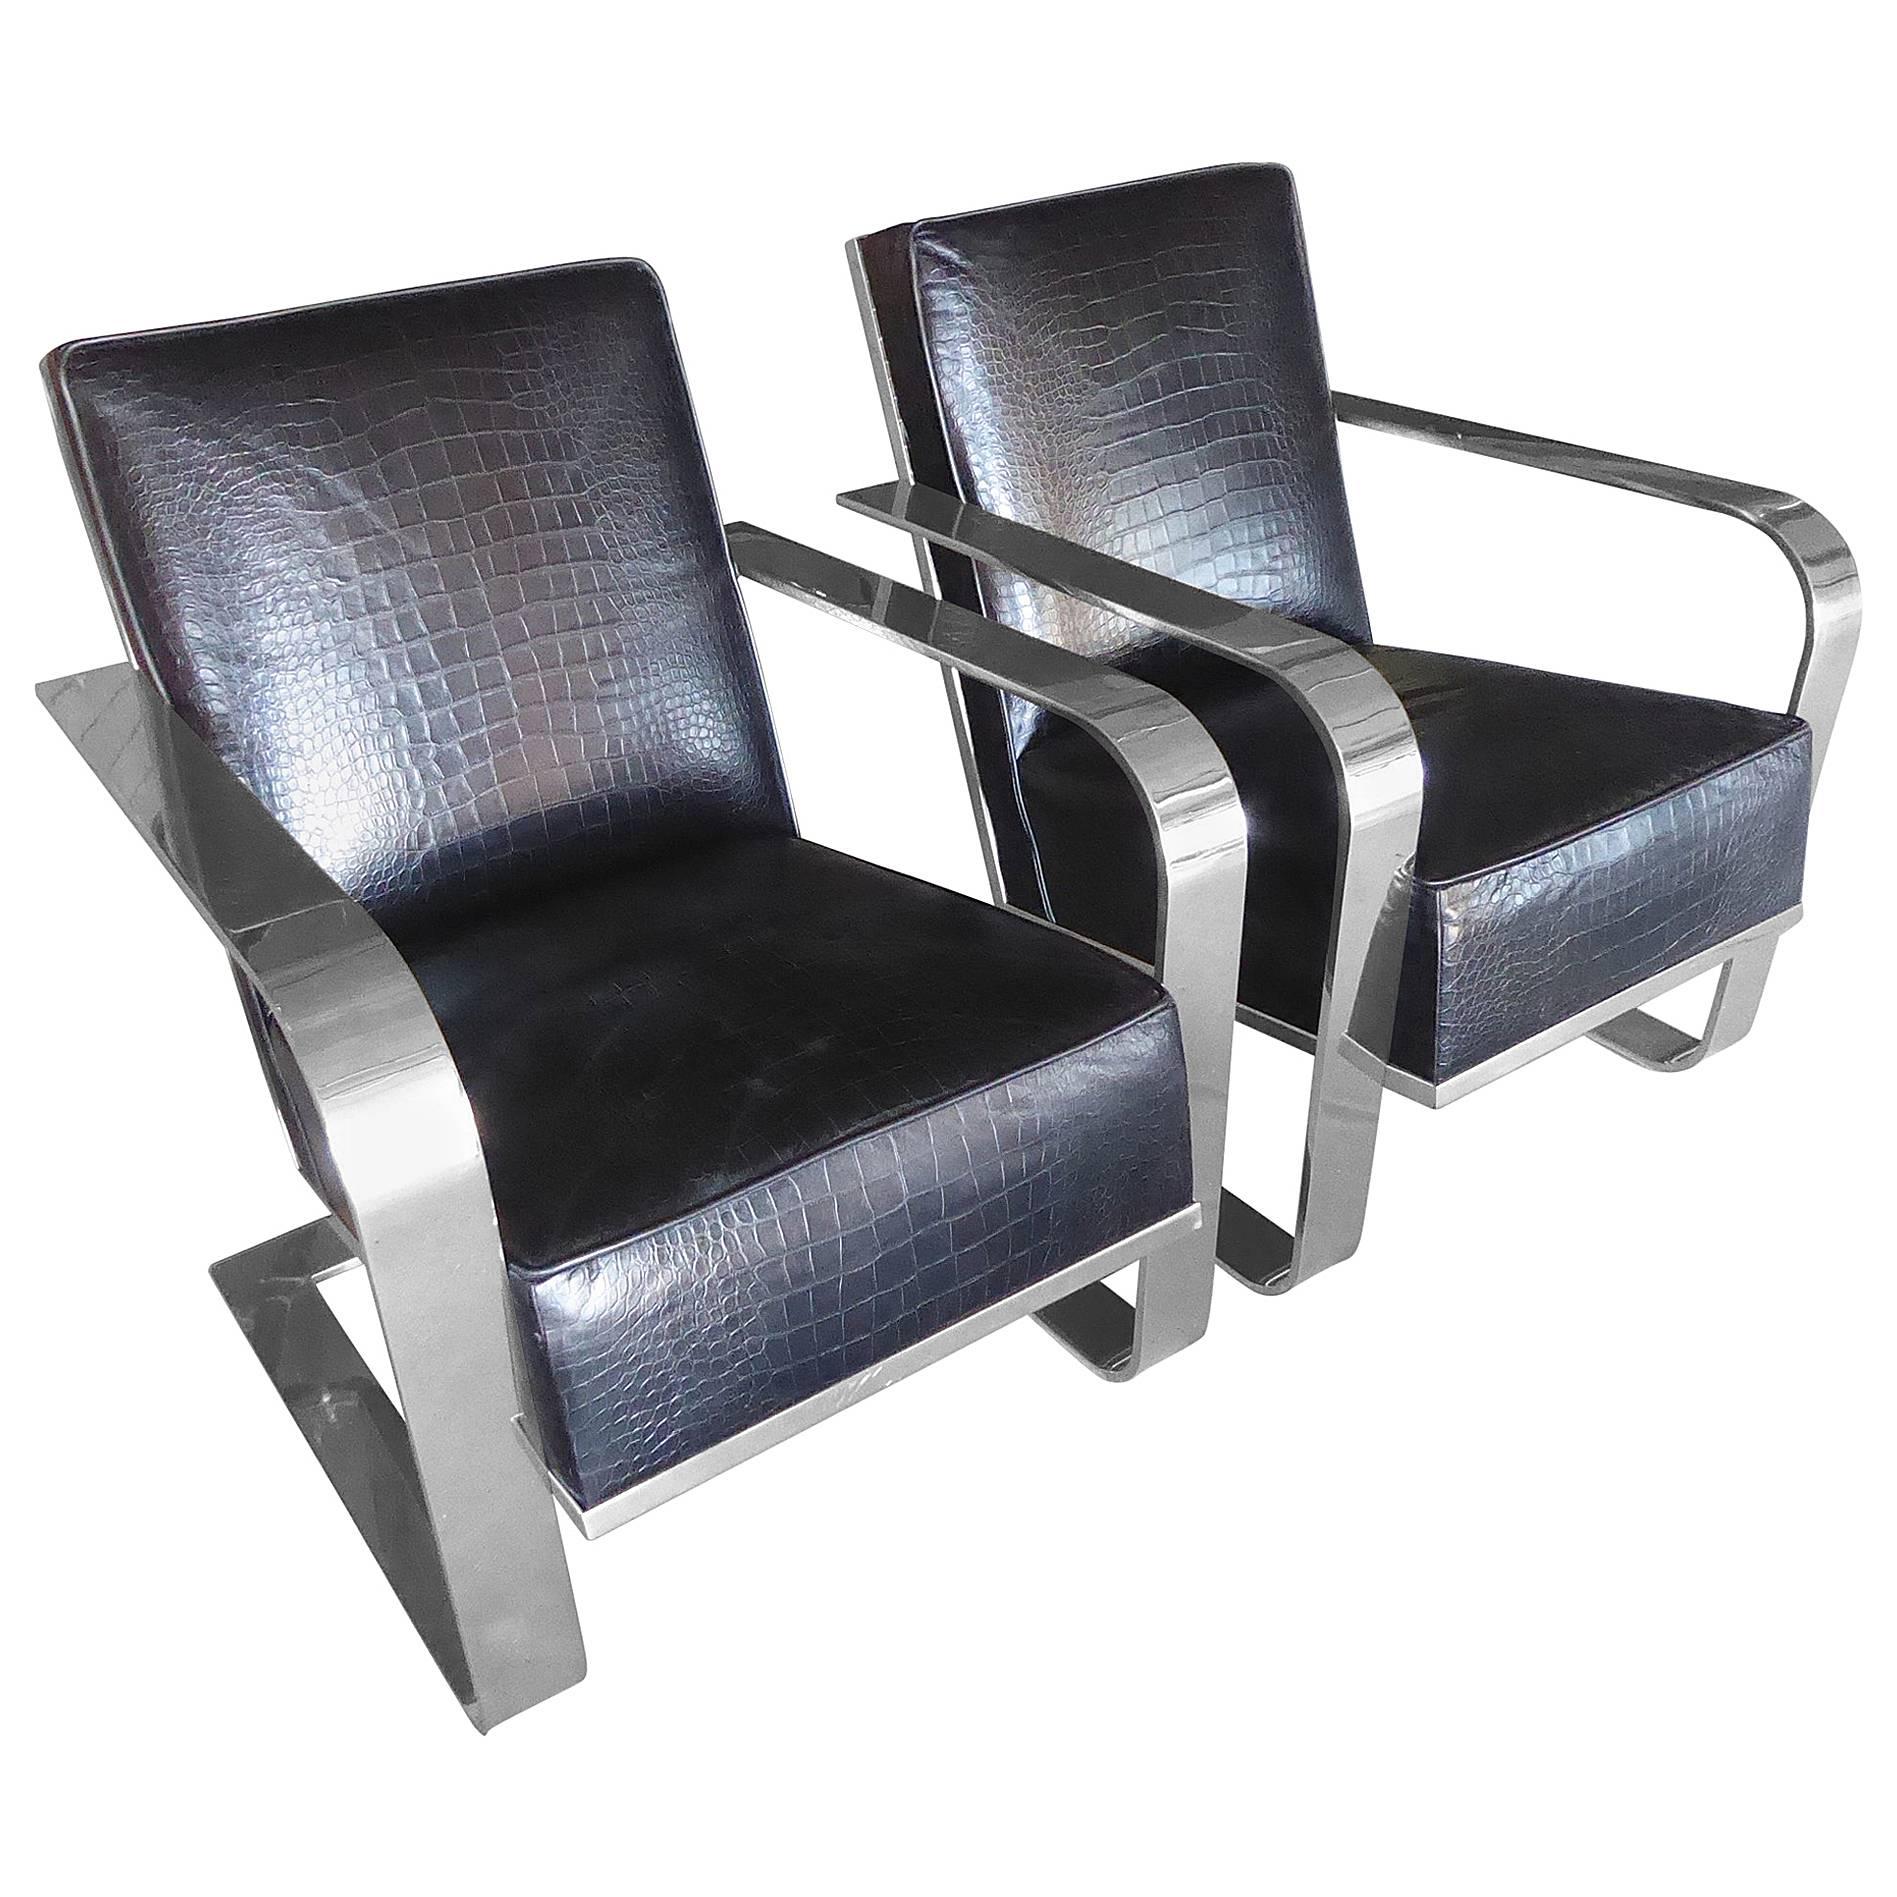 Pair of Art Deco Inspired Nickeled Steel and Leather Lounge Chairs, Ralph Lauren For Sale